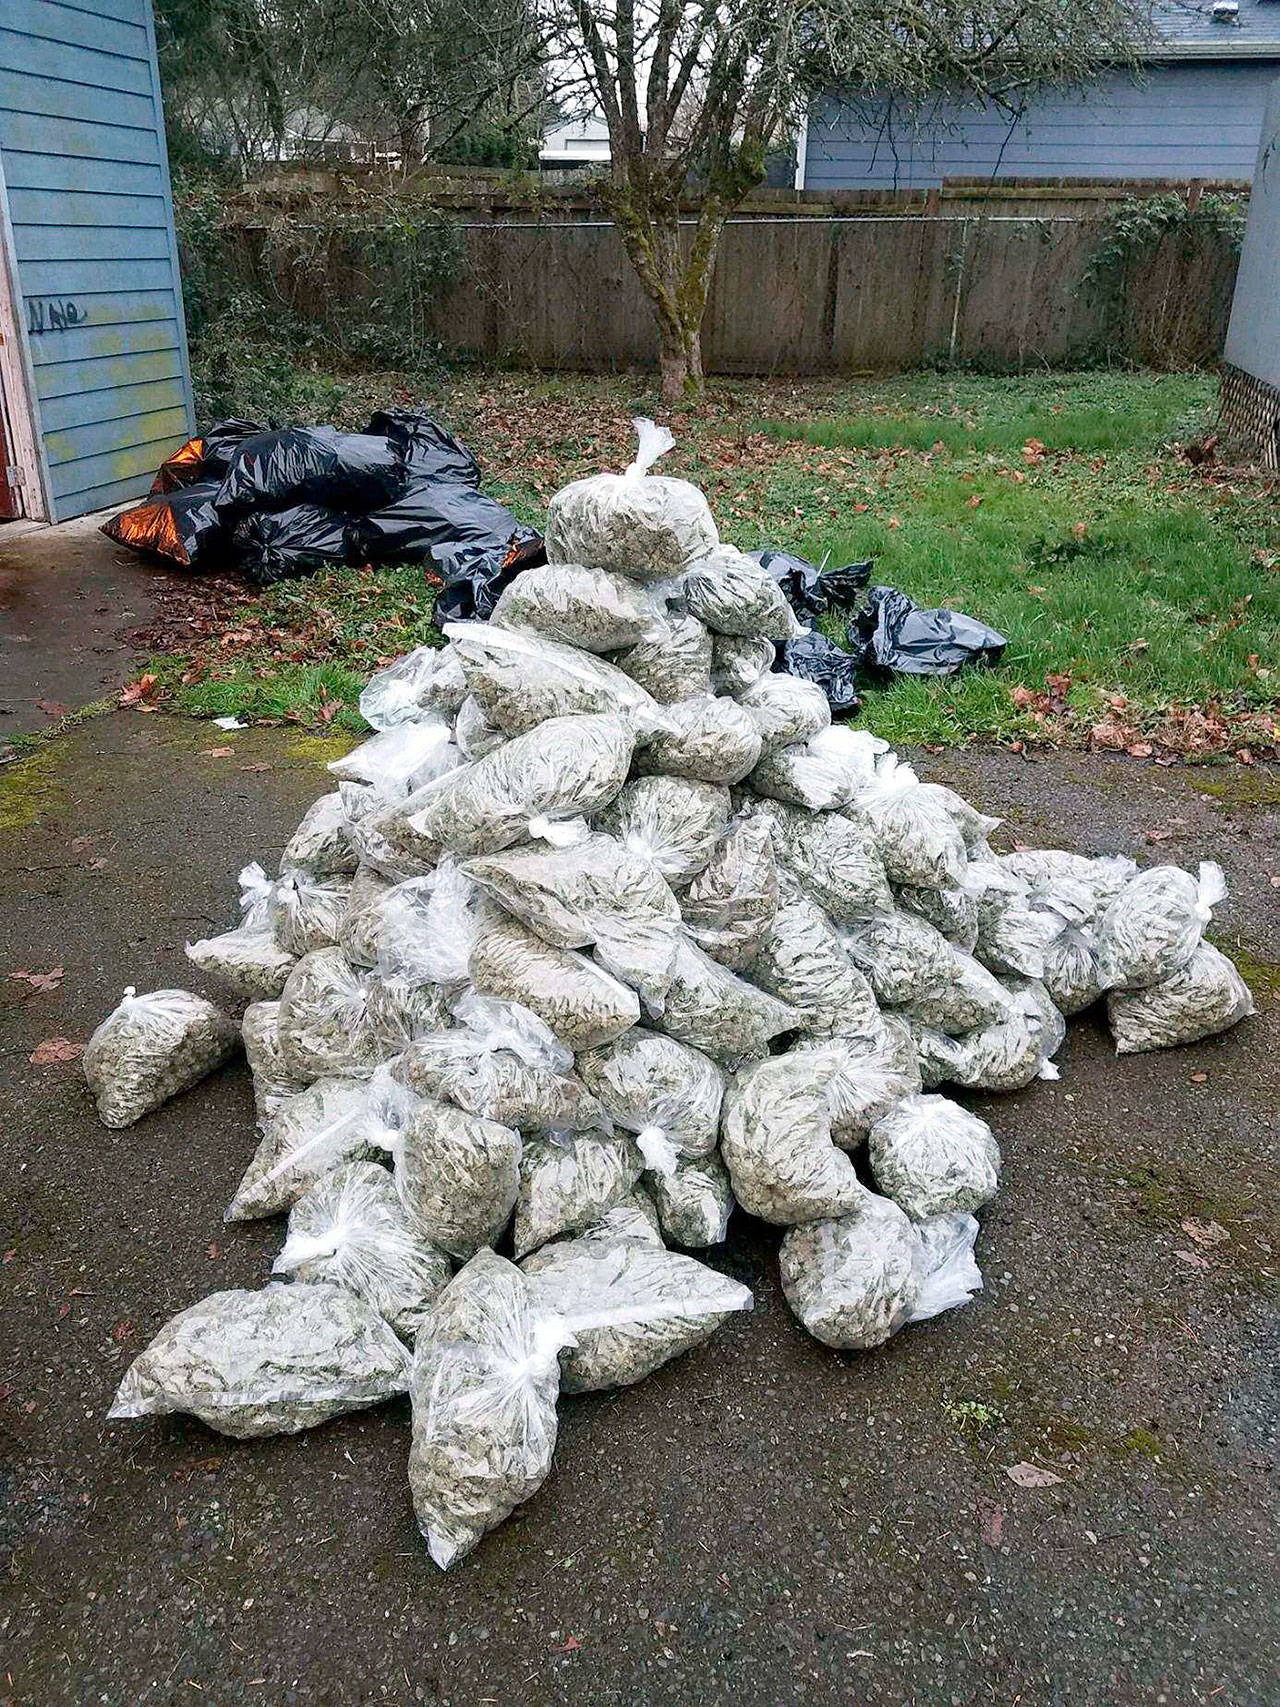 Several of the bags of processed marijuana that King County Sheriff’s Office detectives seized last week. COURTESY PHOTO, King County Sheriff’s Office